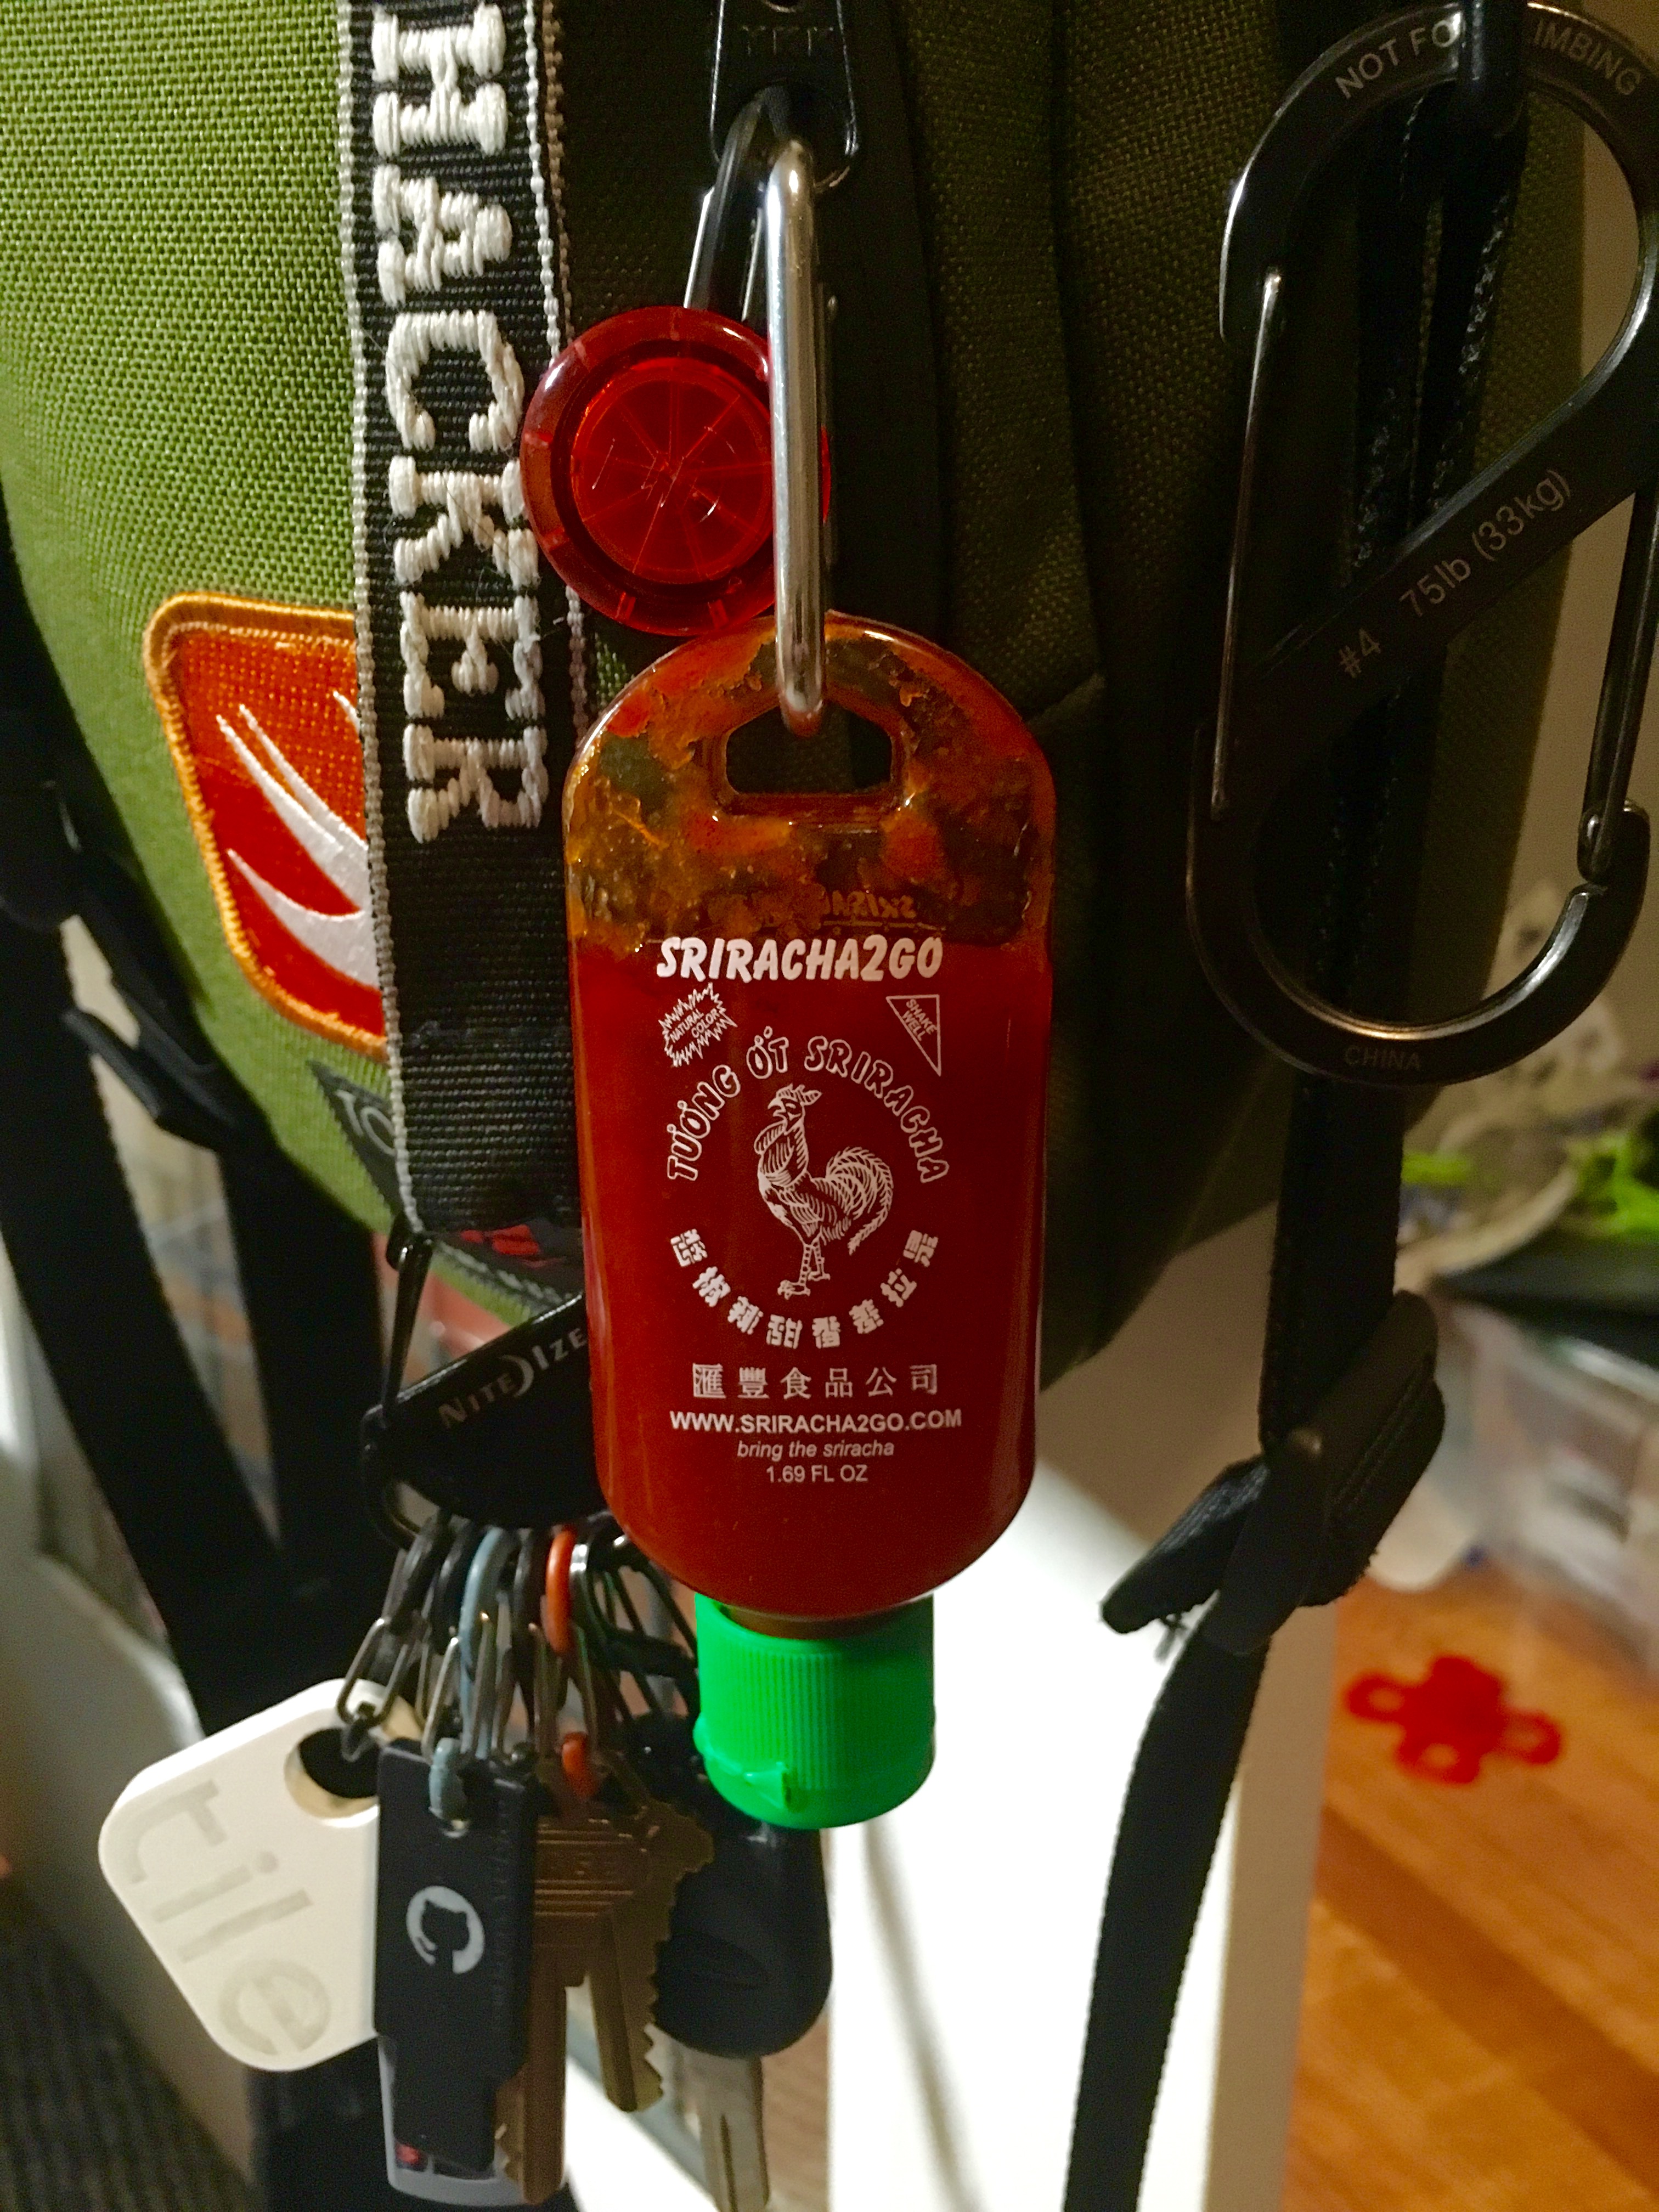 'Small Sriracha bottle attached to messenger bag'